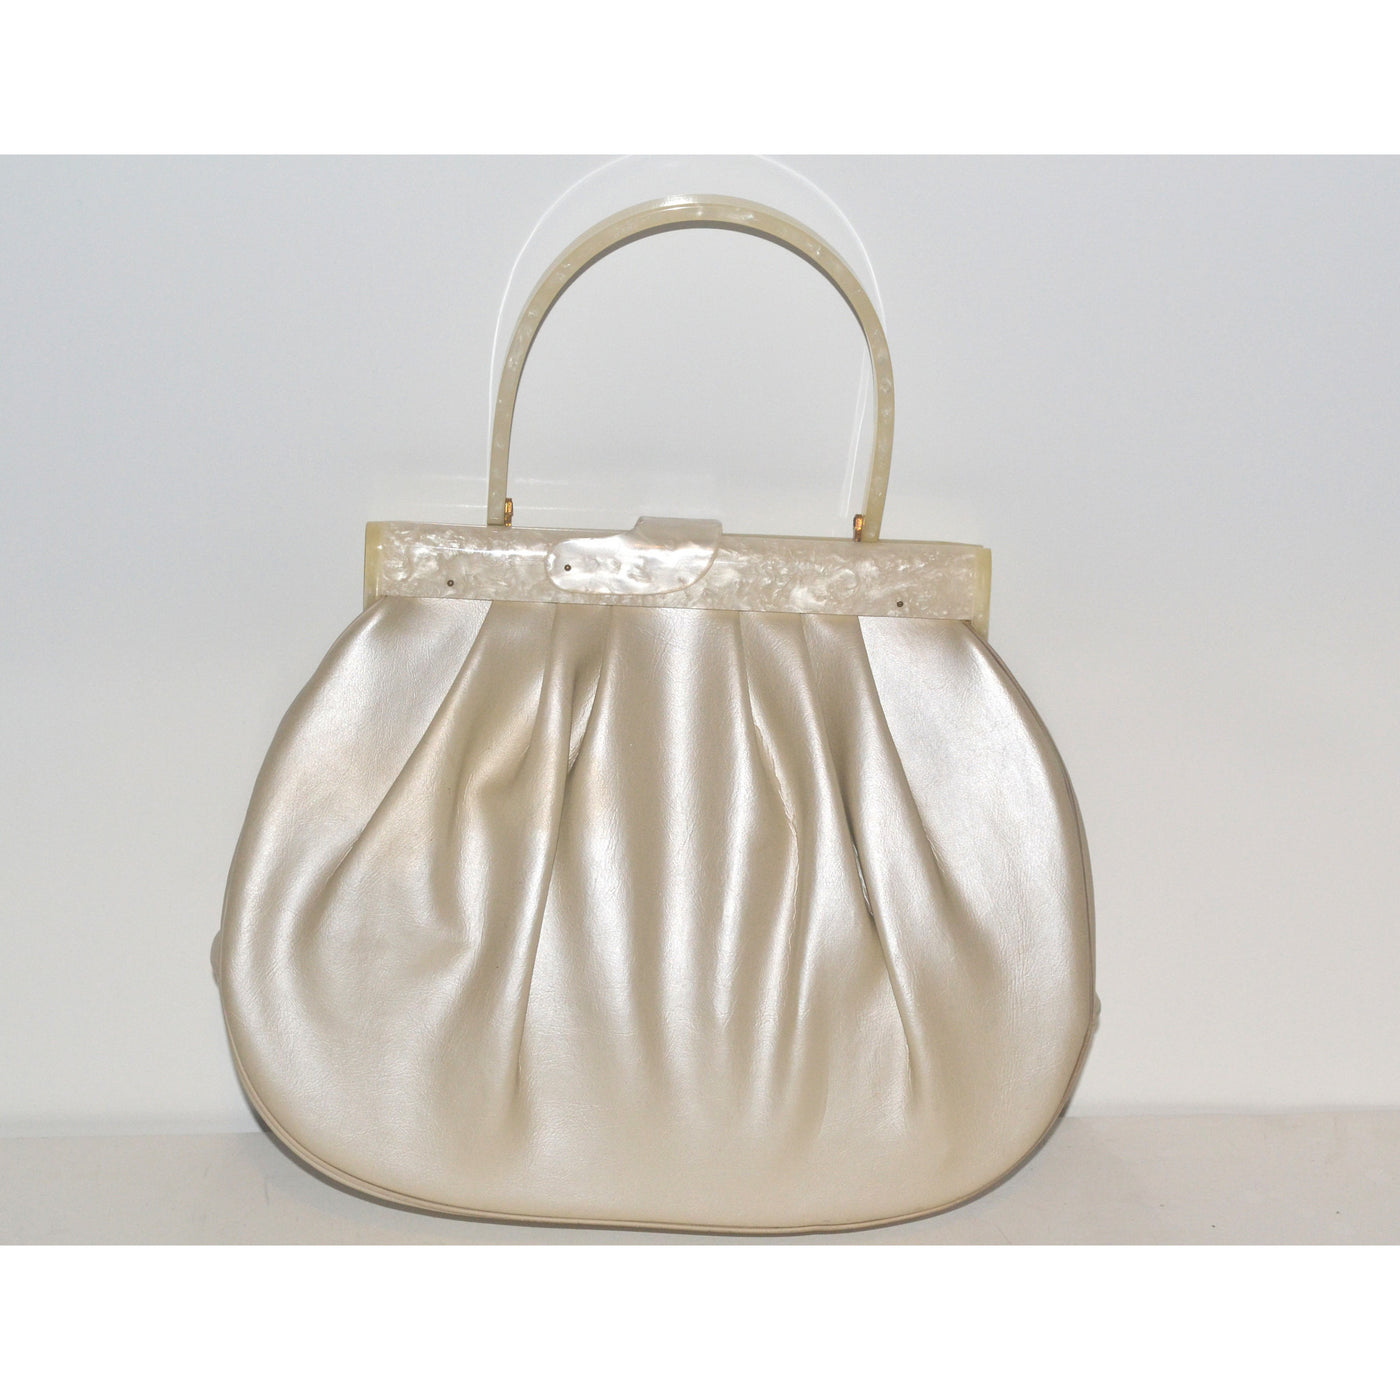 Vintage Pearlescent Leather Lucite Handle Purse